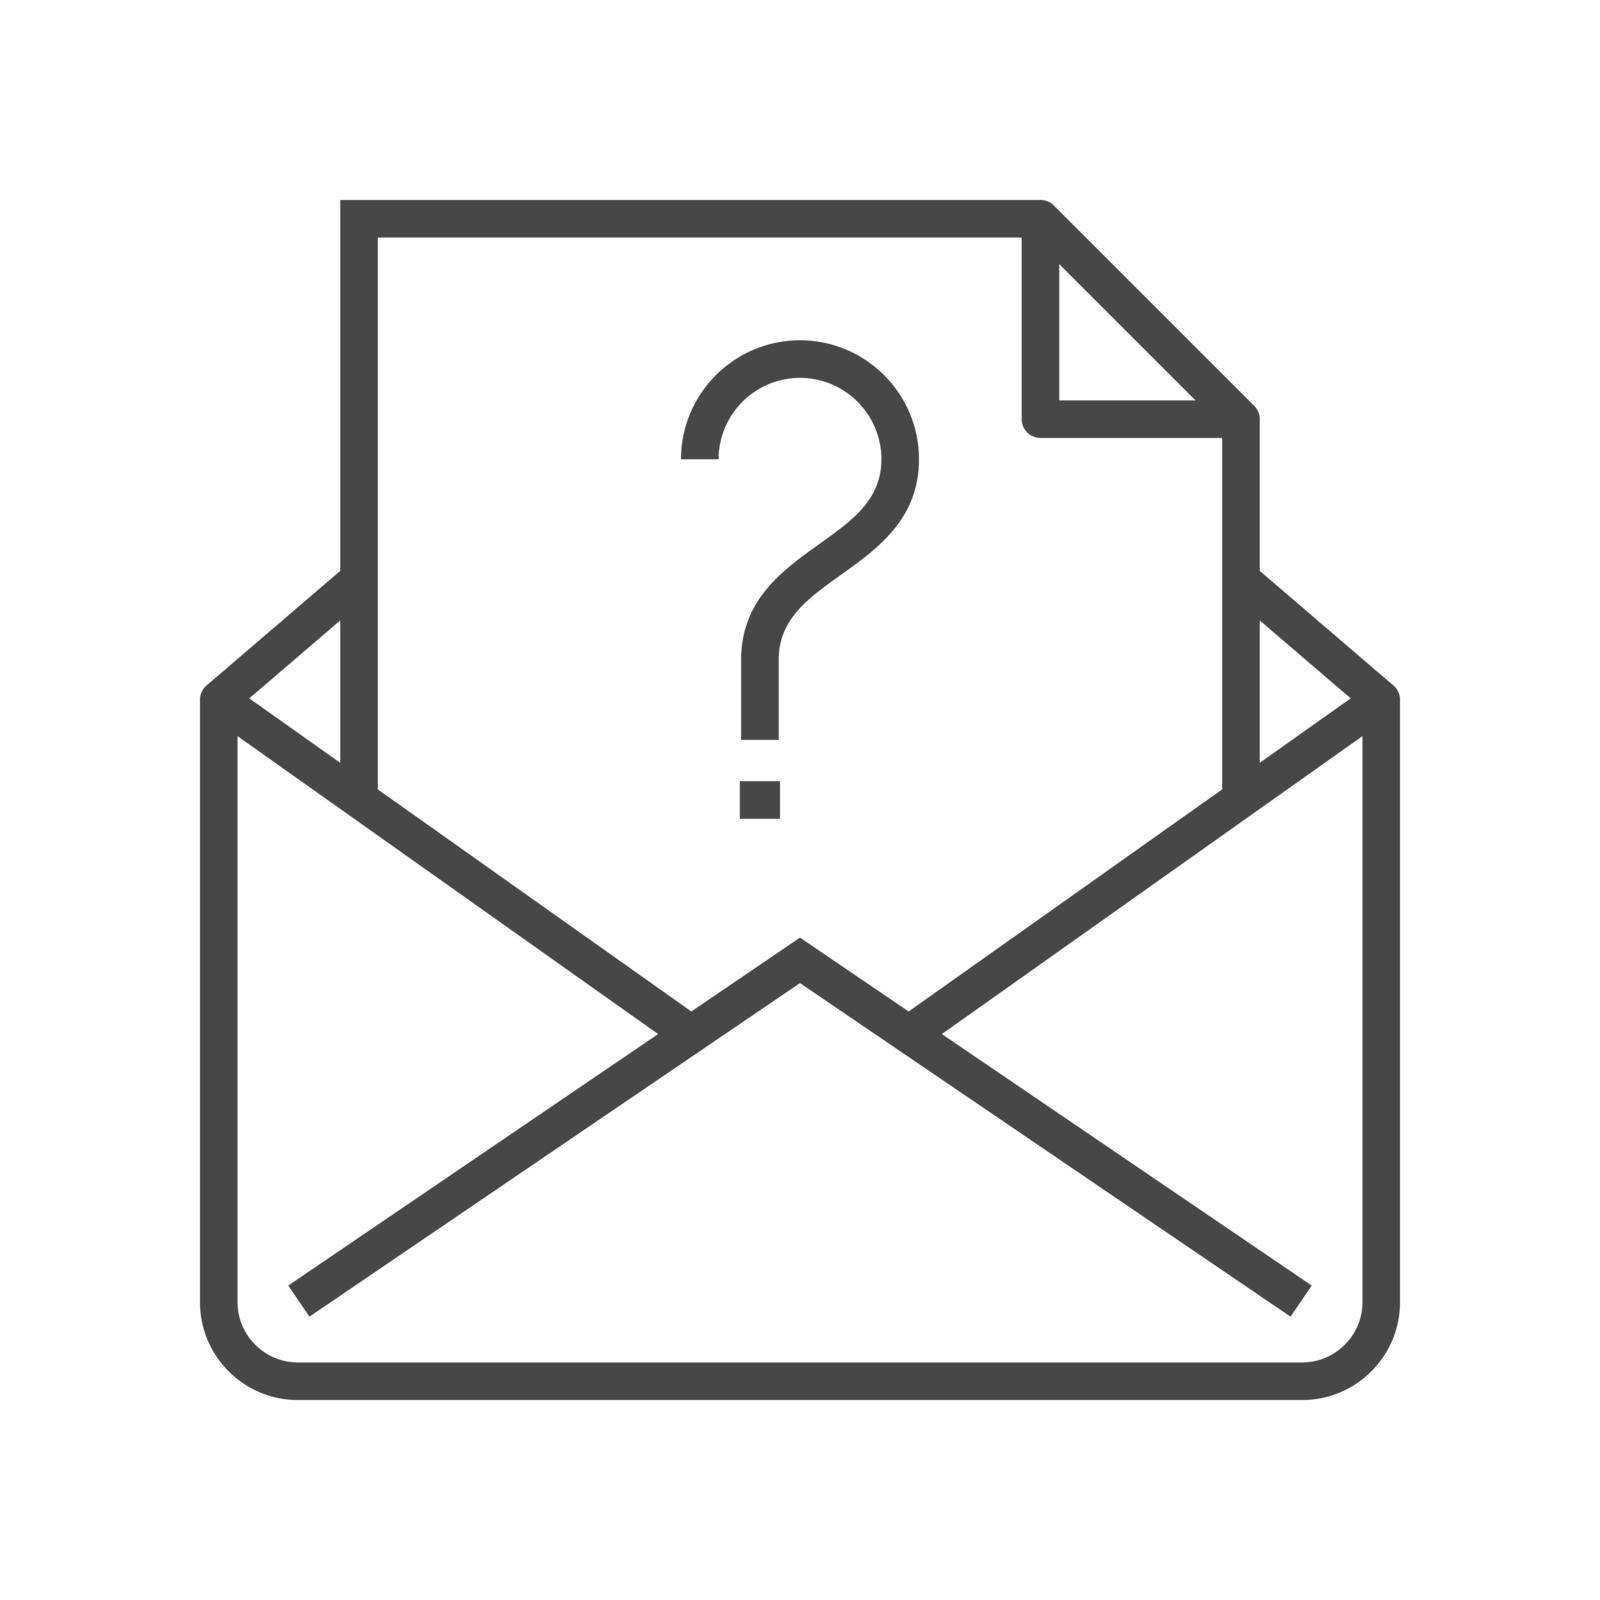 Mail with Question Mark Thin Line Vector Icon. Flat icon isolated on the white background. Editable EPS file. Vector illustration.